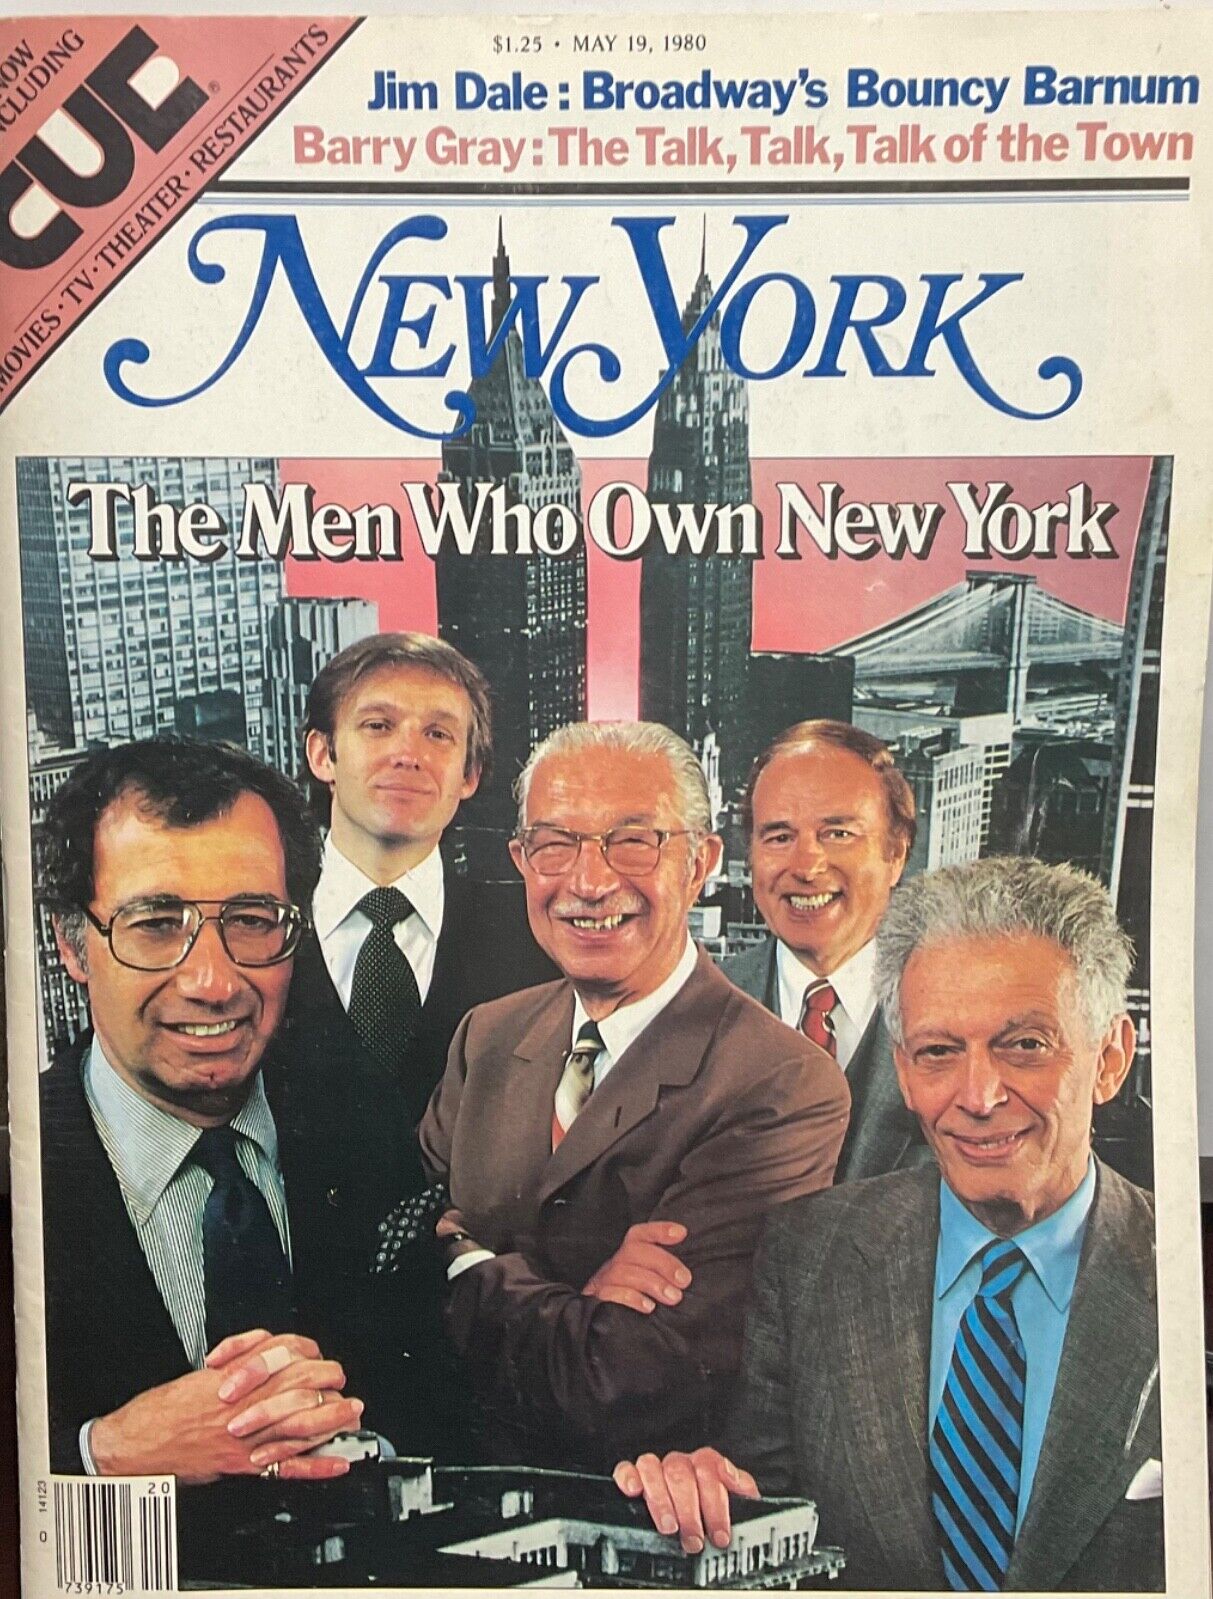 Trump in “The Men Who Own New York”